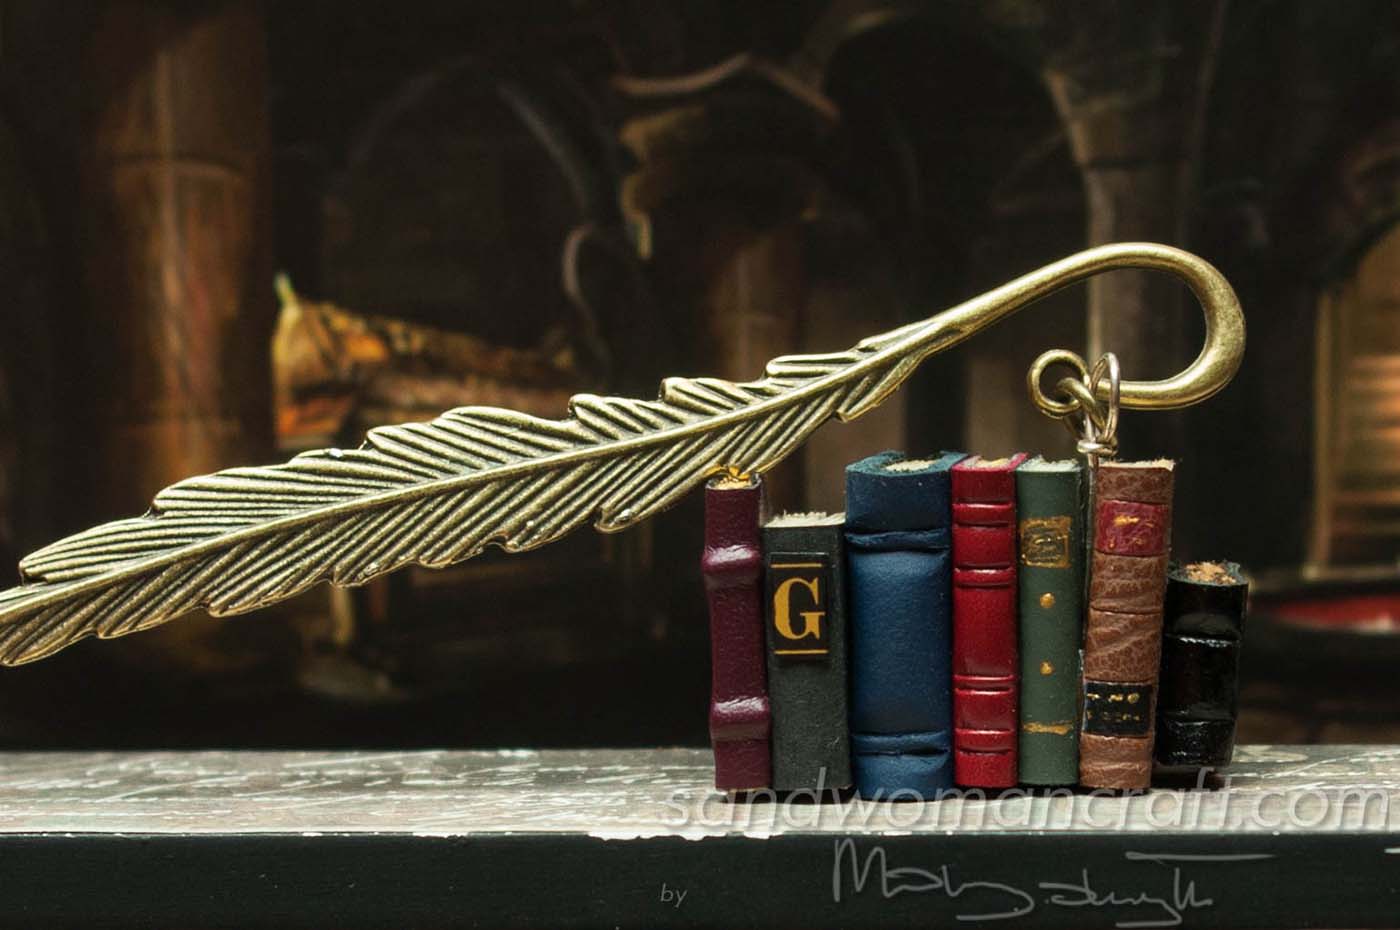 Bookmarks with miniature books